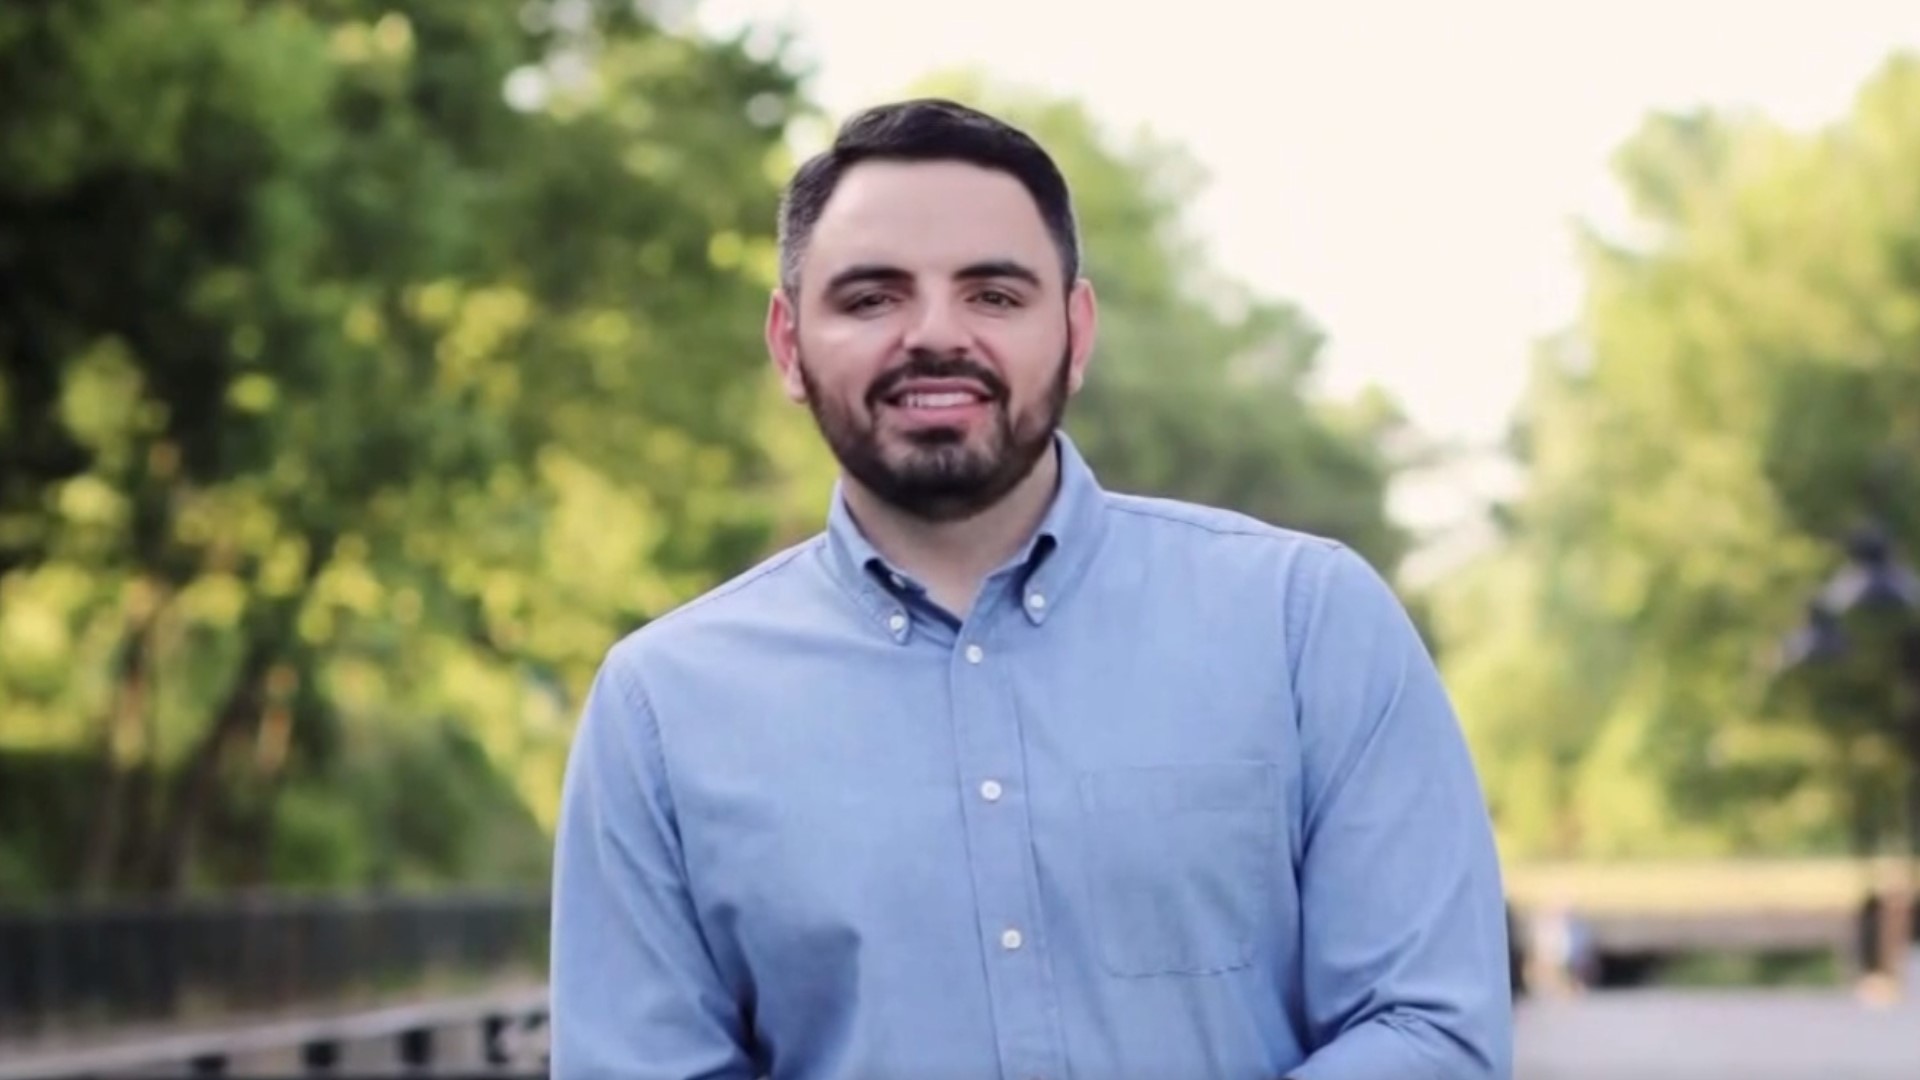 Kevin Flores, from Springdale, is now spending his time as a White House Fellow, which is considered to be the most prestigious leadership program.